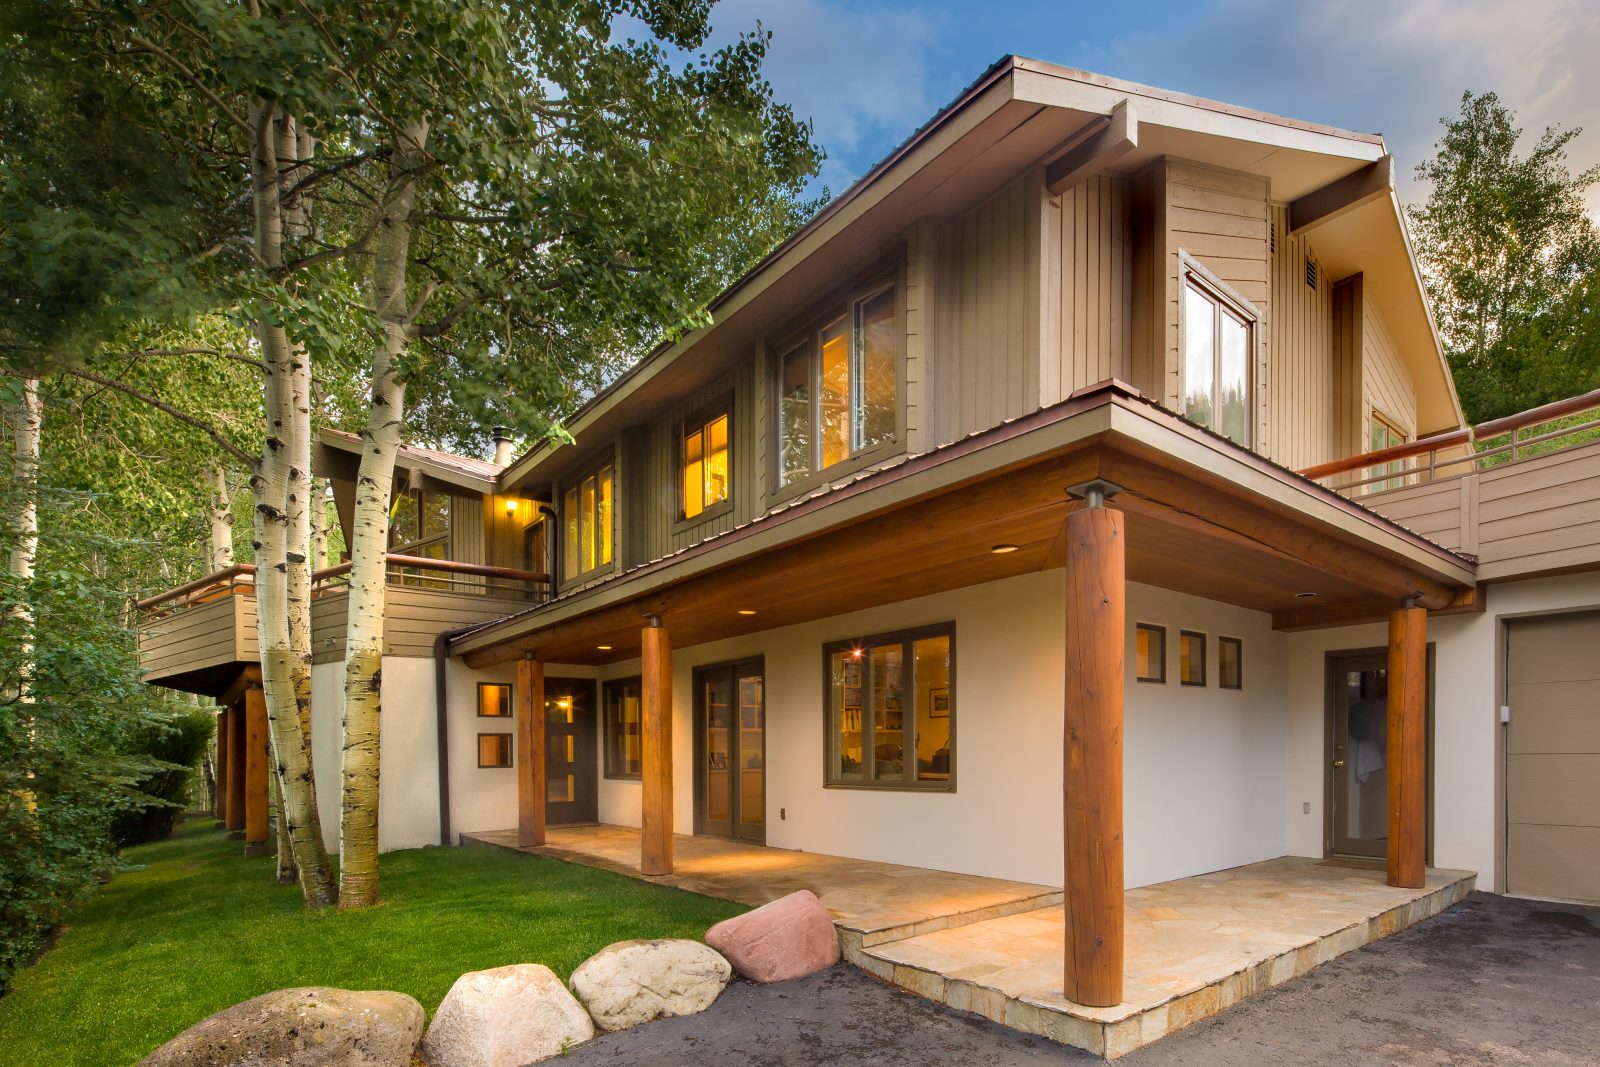 Private Home in an Aspen Grove Above Snowmass Village